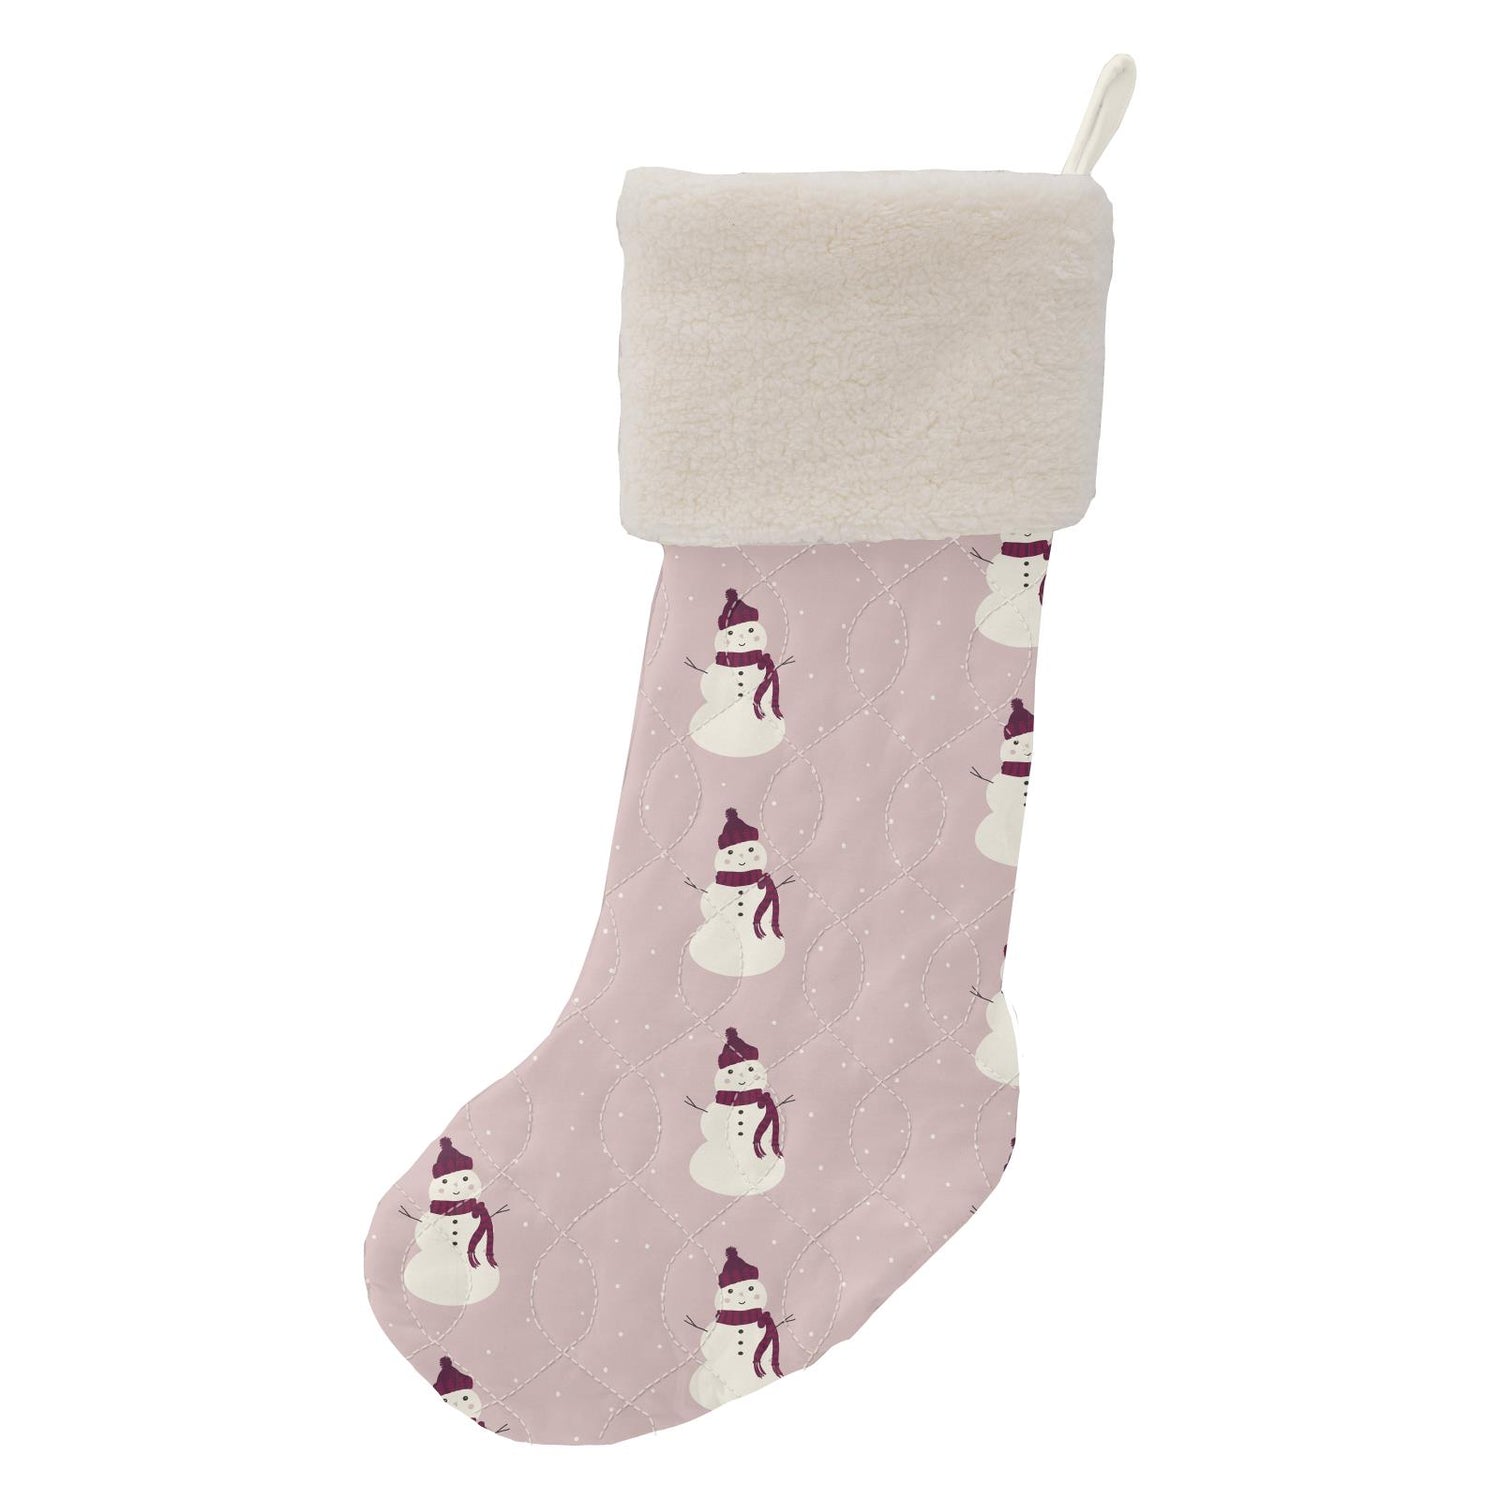 Print Quilted Stocking in Baby Rose Snowman/Jingle Bell Stripe